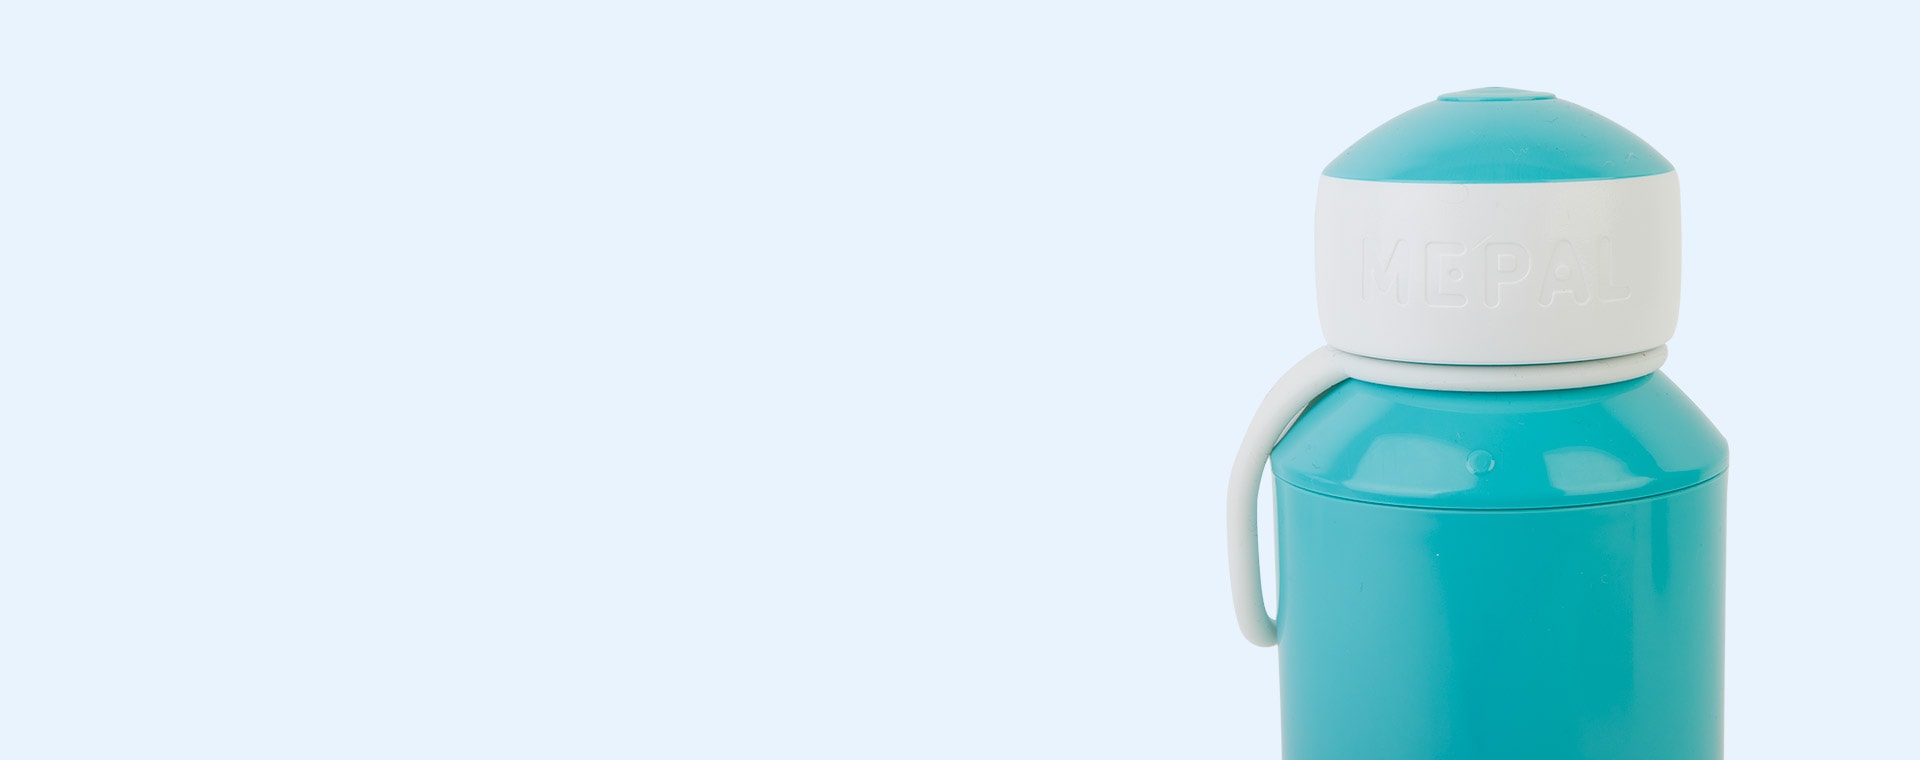 Turquoise Mepal Campus Drinking Bottle Pop-Up